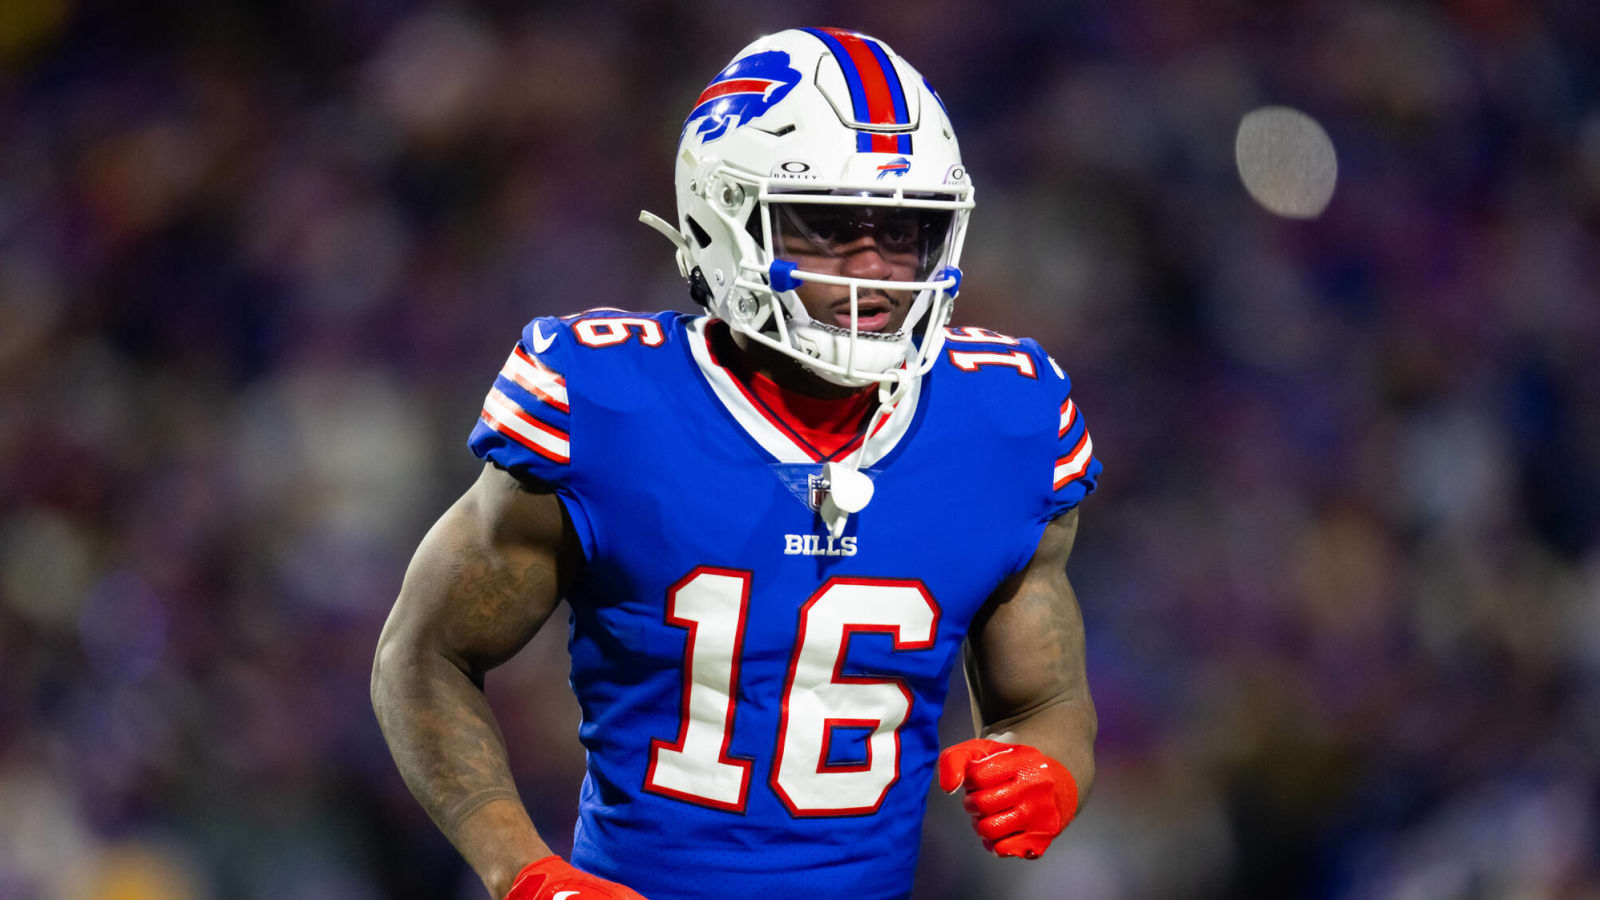 ESPN says Buffalo Bills player would benefit from joining a new team in the offseason